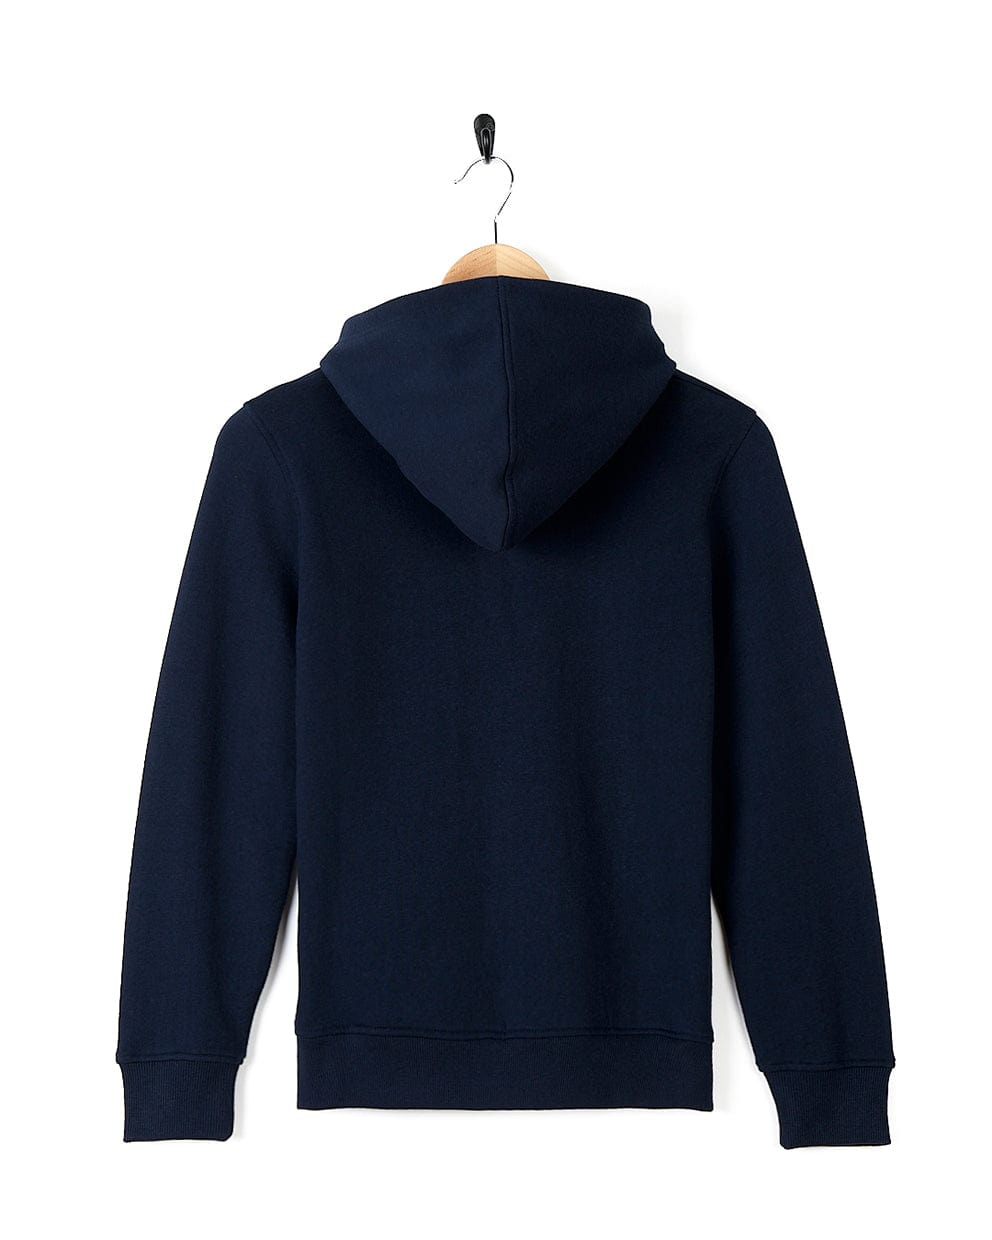 A dark blue "Recycled Kids Pop Hoodie" by Tok Corp hanging on a black hanger against a white background.